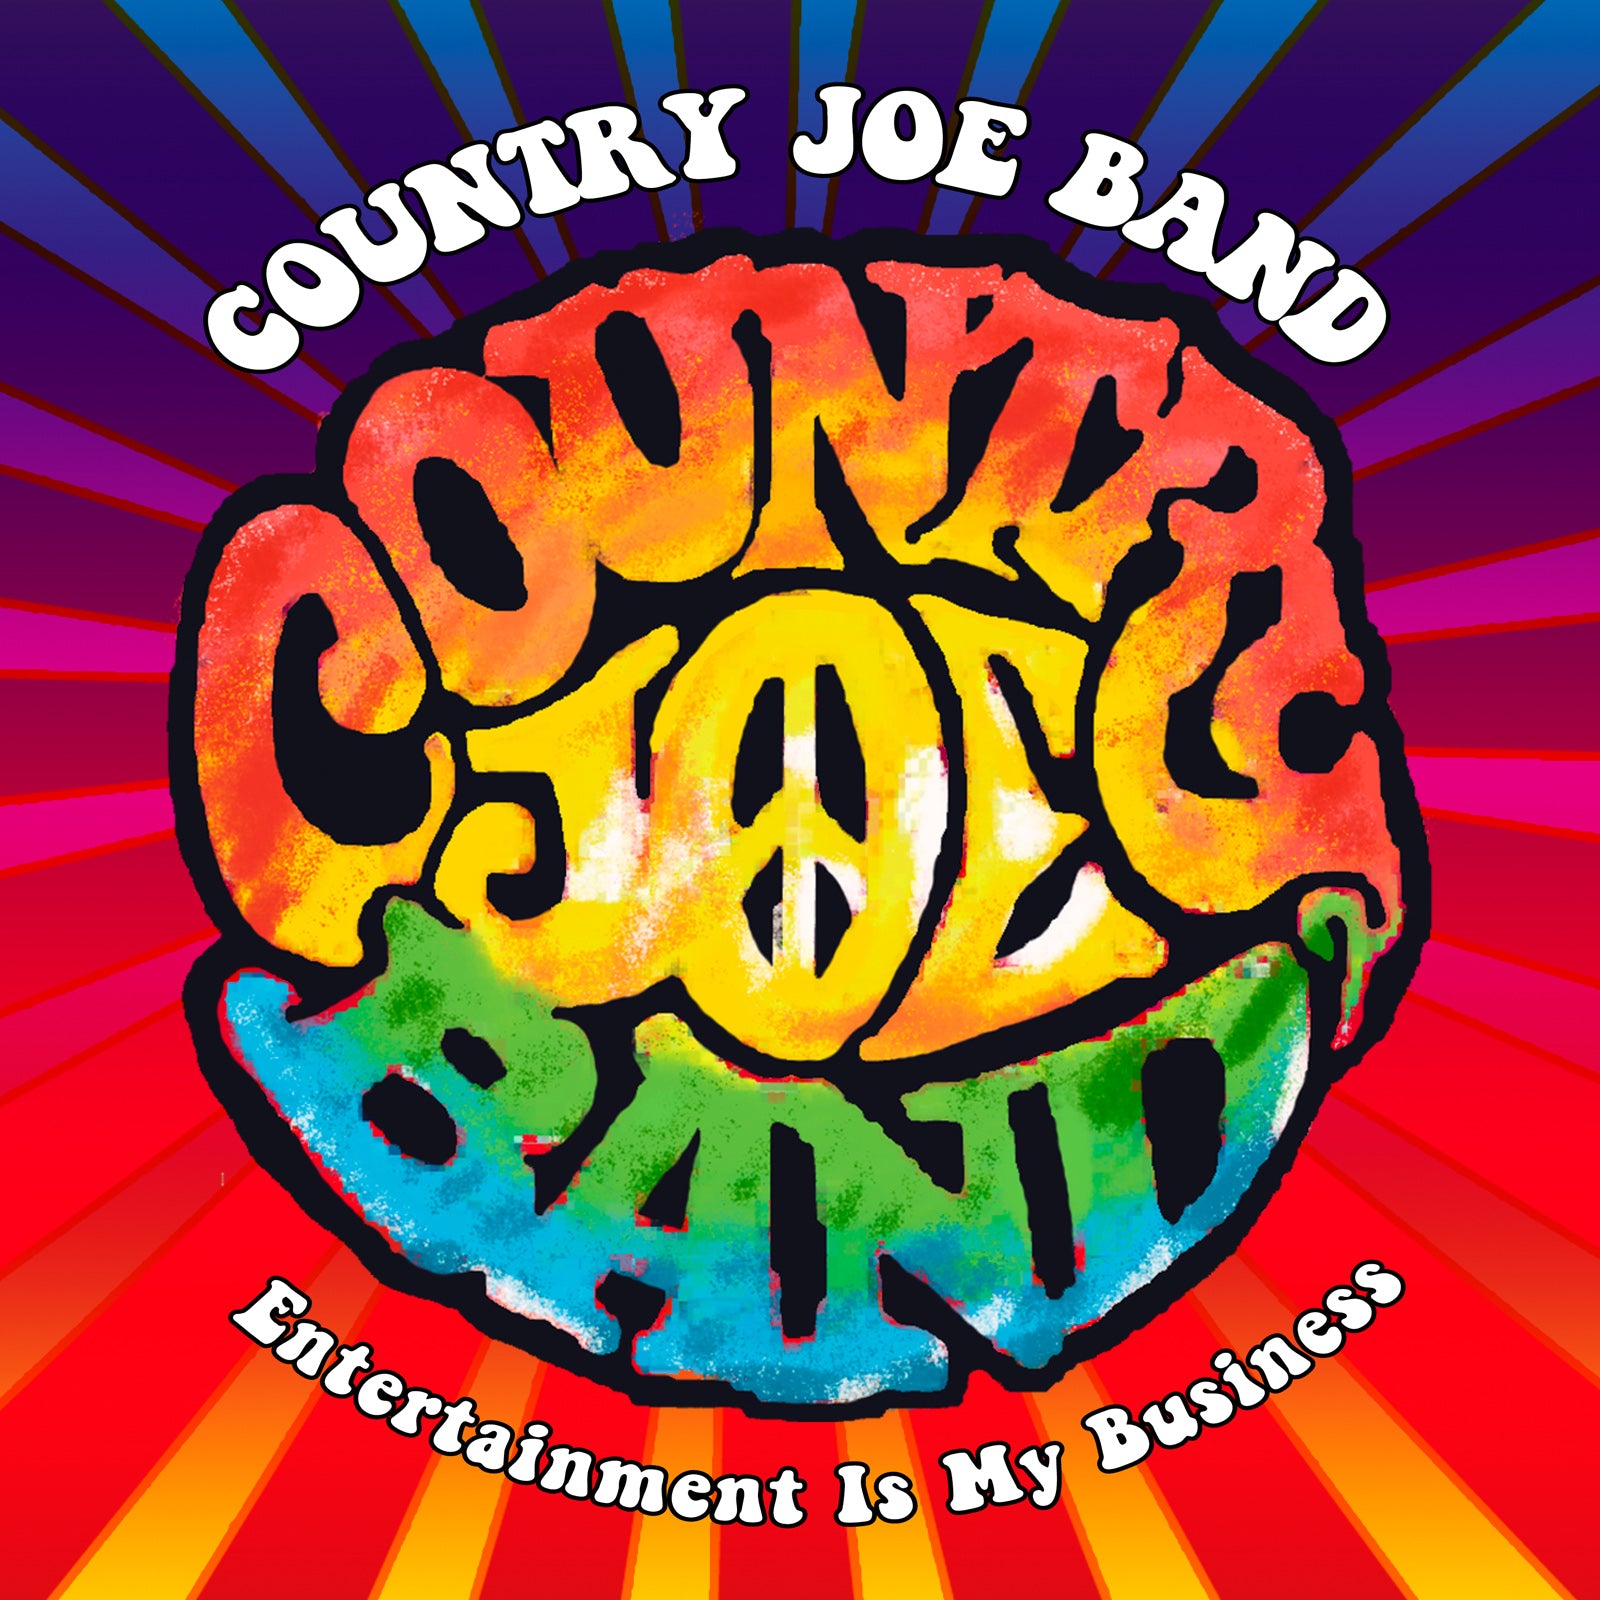 Country Joe Band - Entertainment Is My Business - 2CD+DVD Album - Secret Records Limited